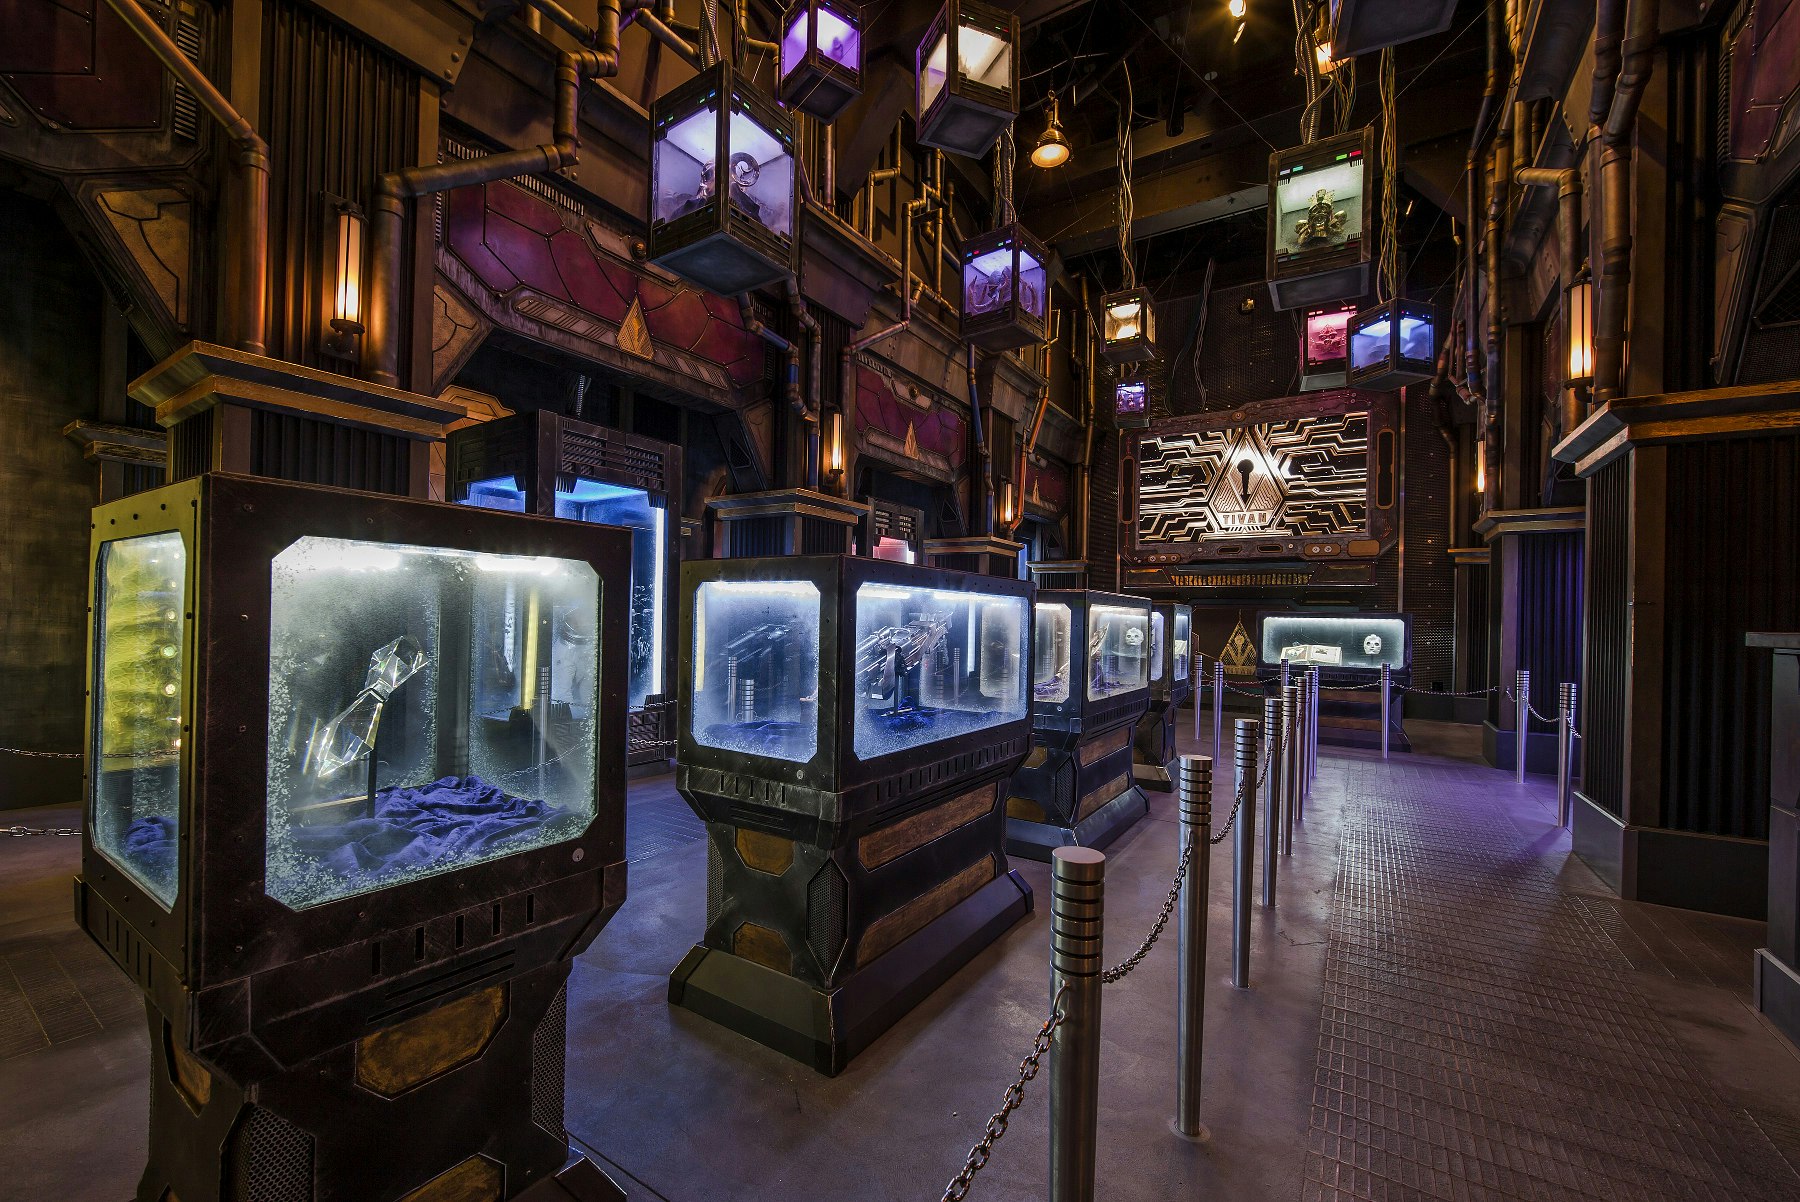 Artifacts from the movie Guardians of the Galaxy are stored behind glass cases in a set which resembles the film